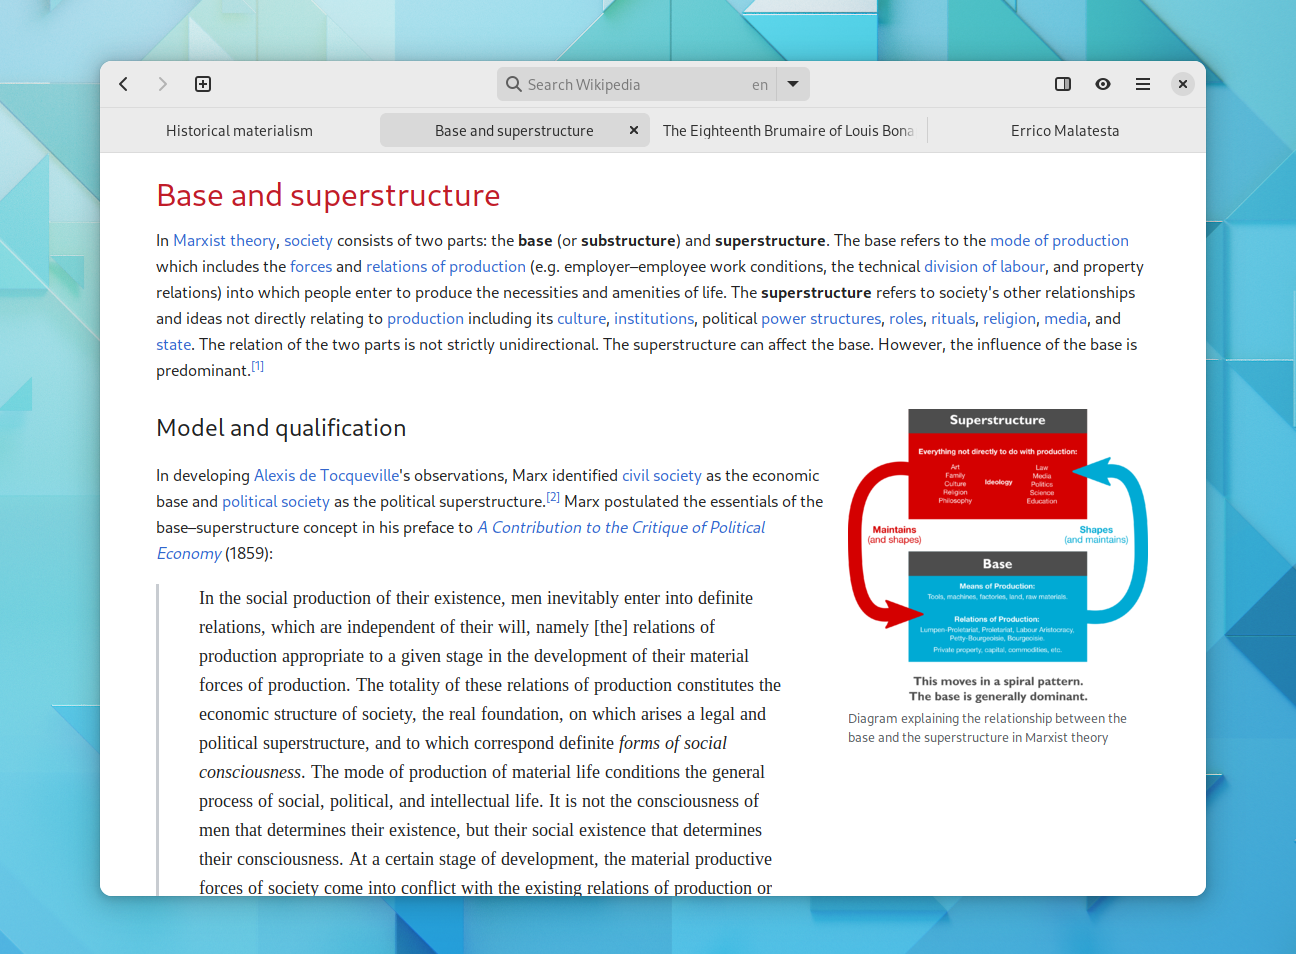 Screenshot of Wike at desktop size, with multiple open tabs. The currently open tab is the page "Base and superstructure".